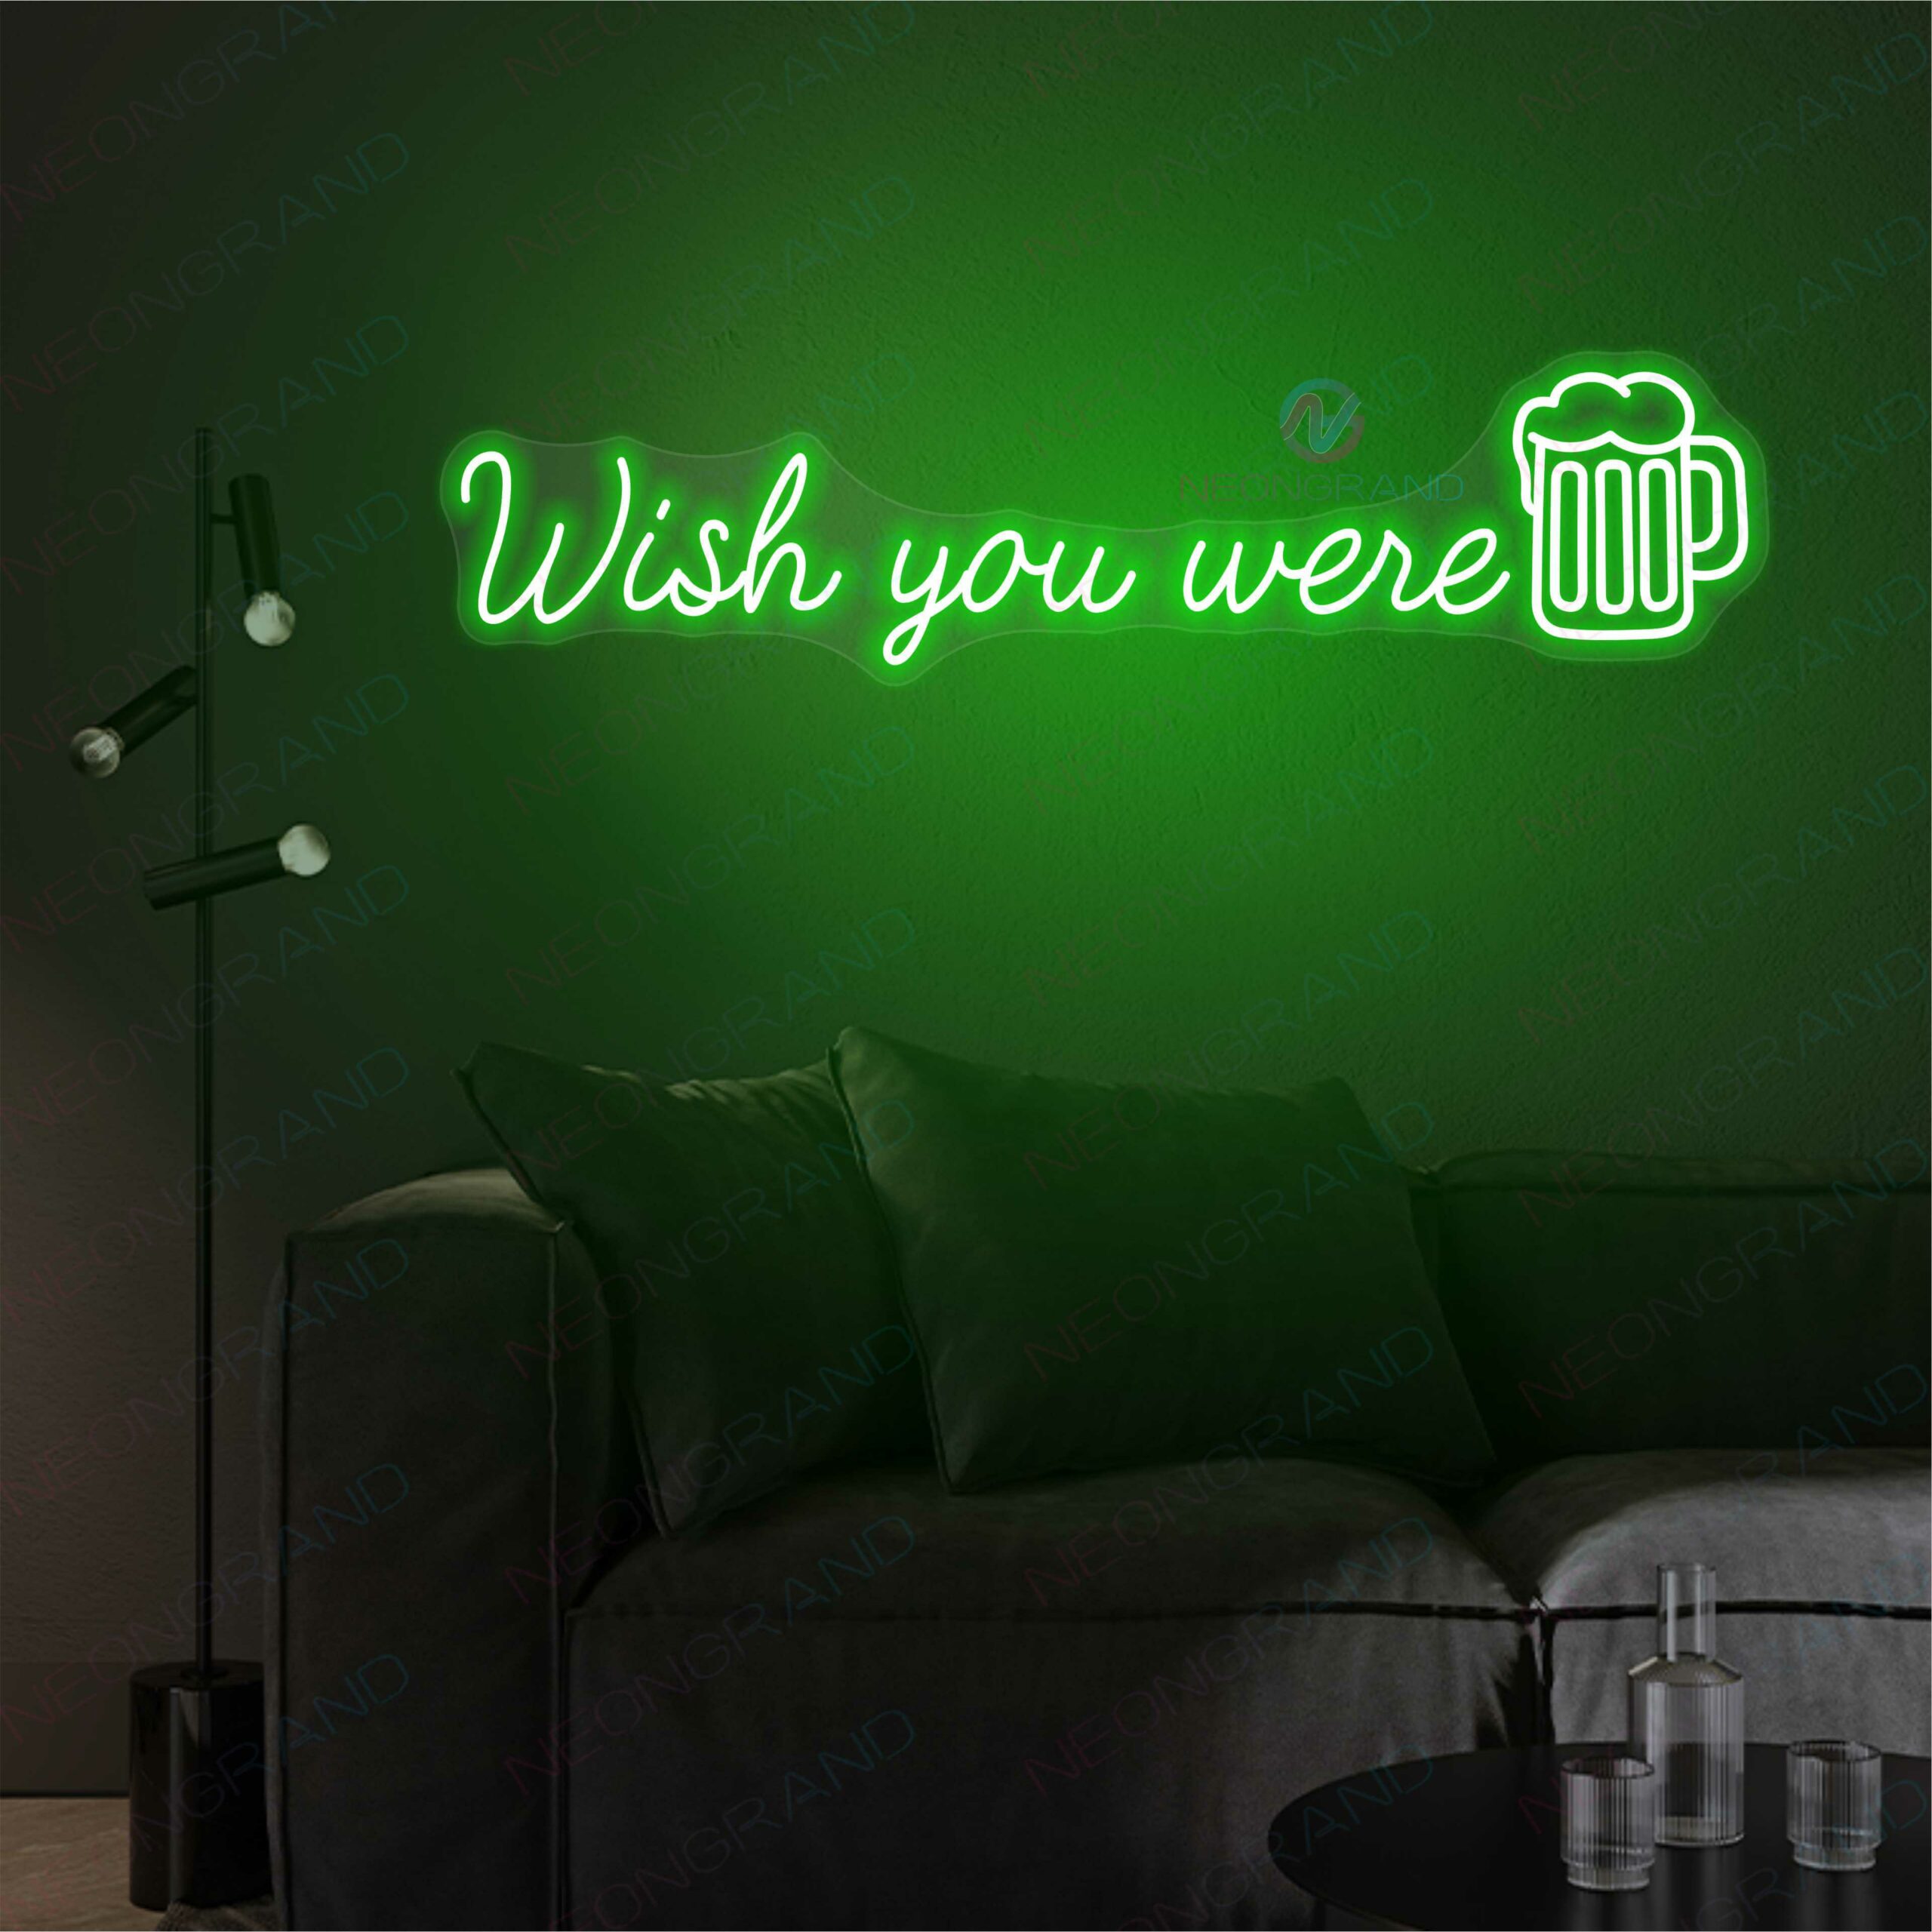 Wish You Were Here Beer Sign Neon Drinking Led Light Neon Beer Sign